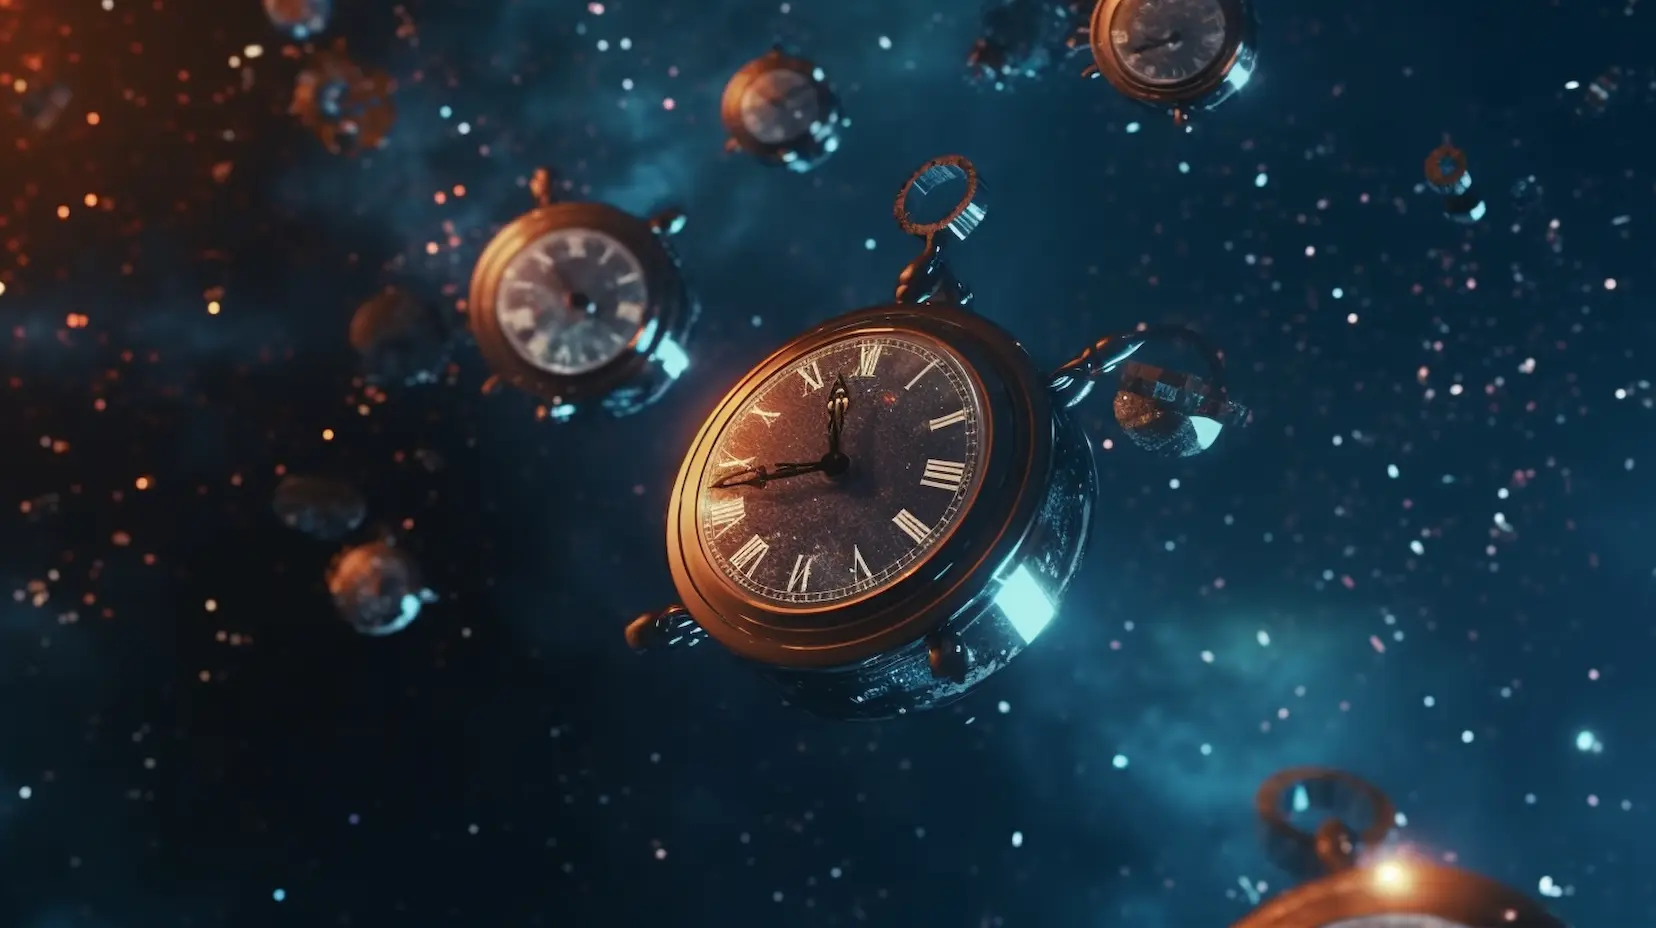 Clockwork Planets - Universe Today